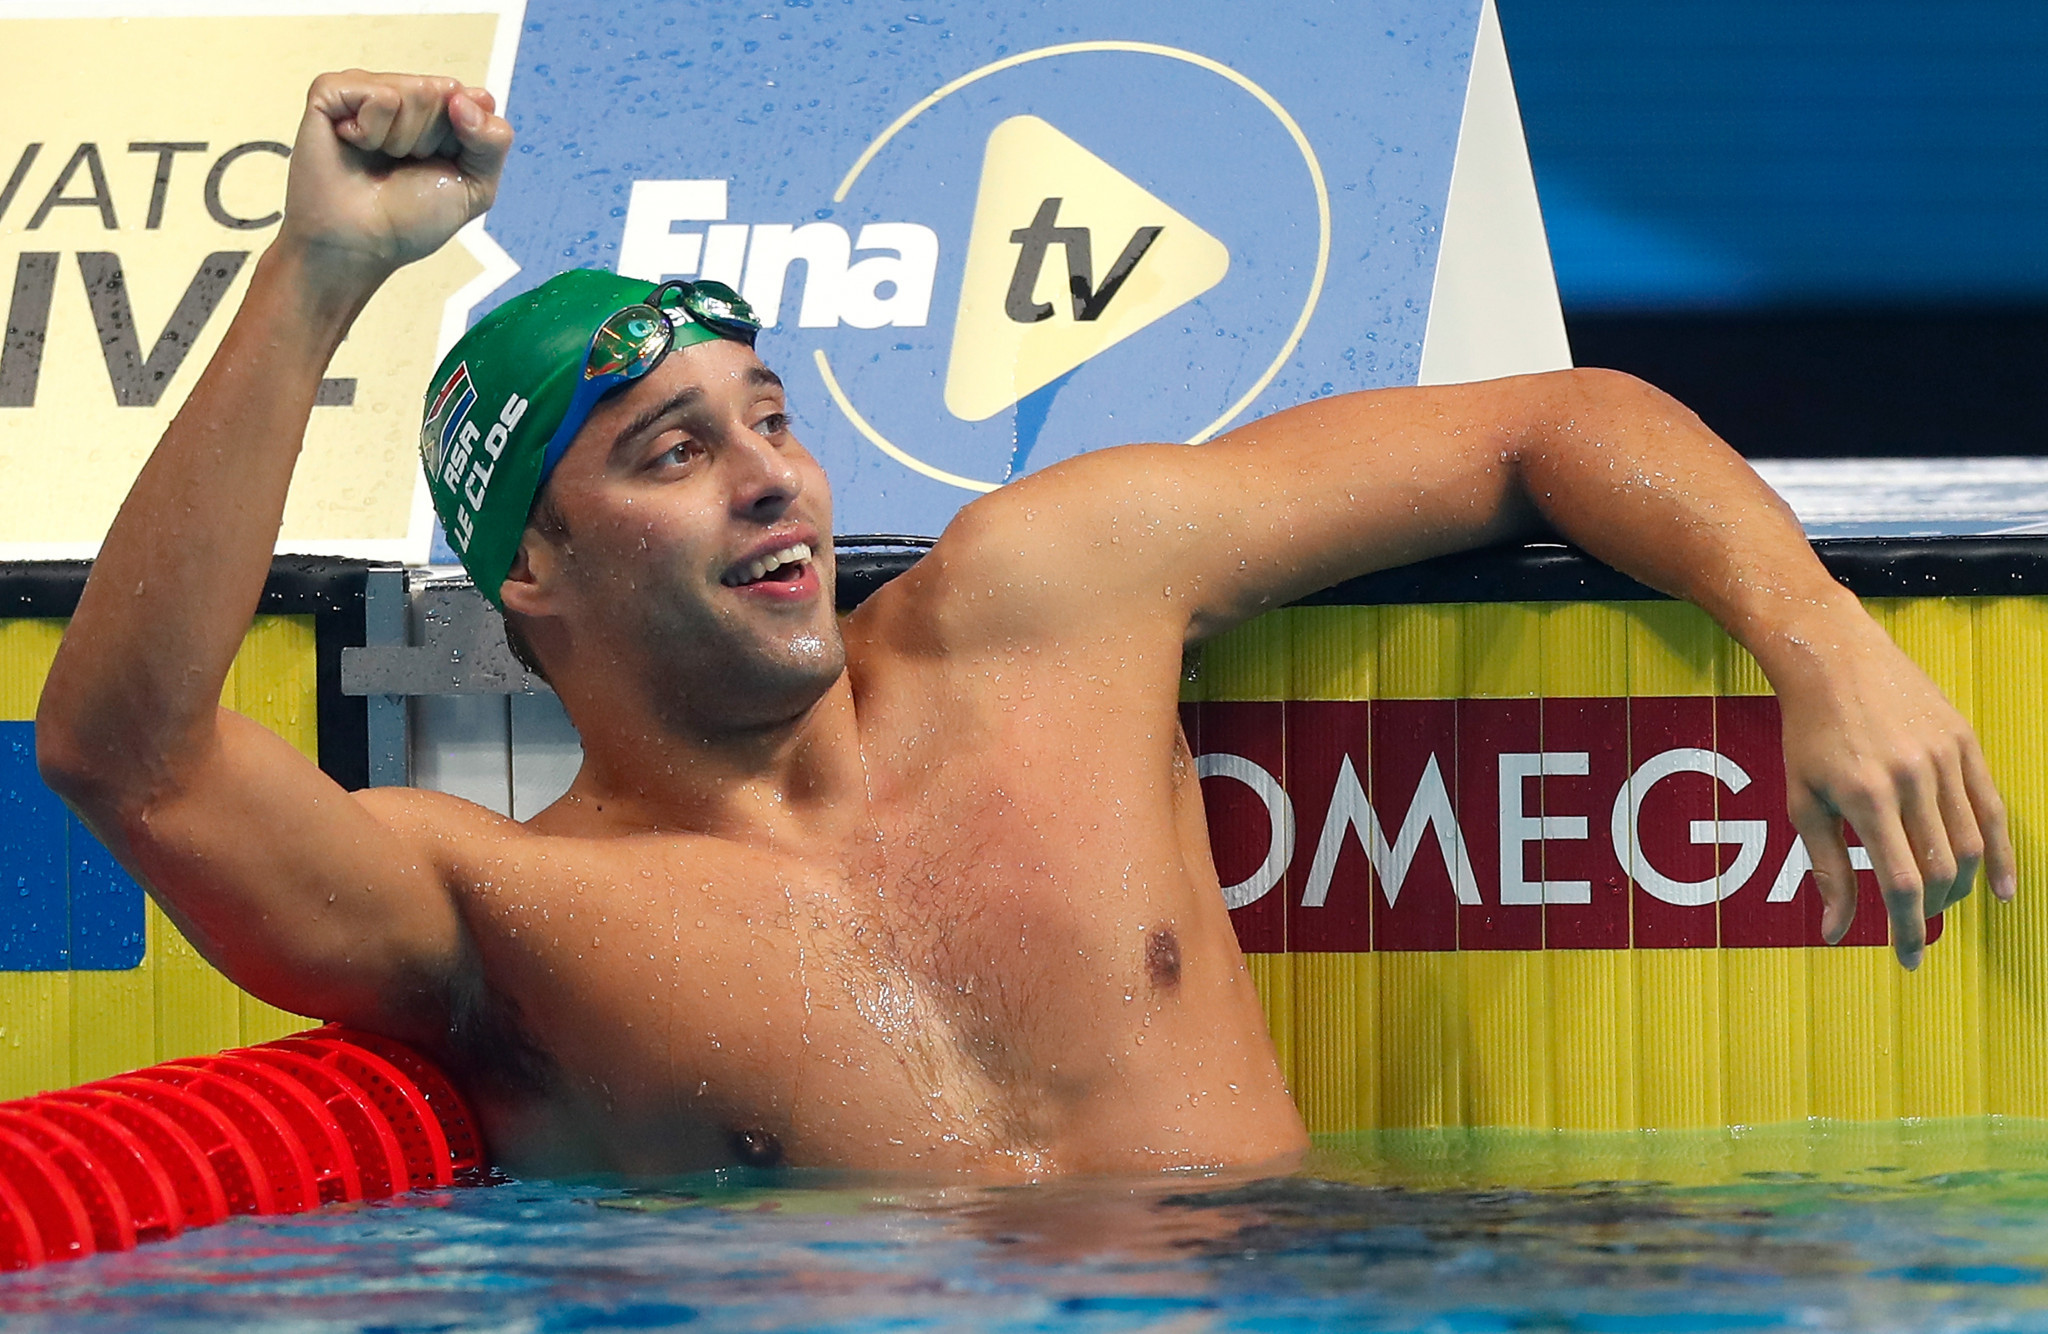 Le Clos gets second gold medal on second day of FINA Swimming World Cup